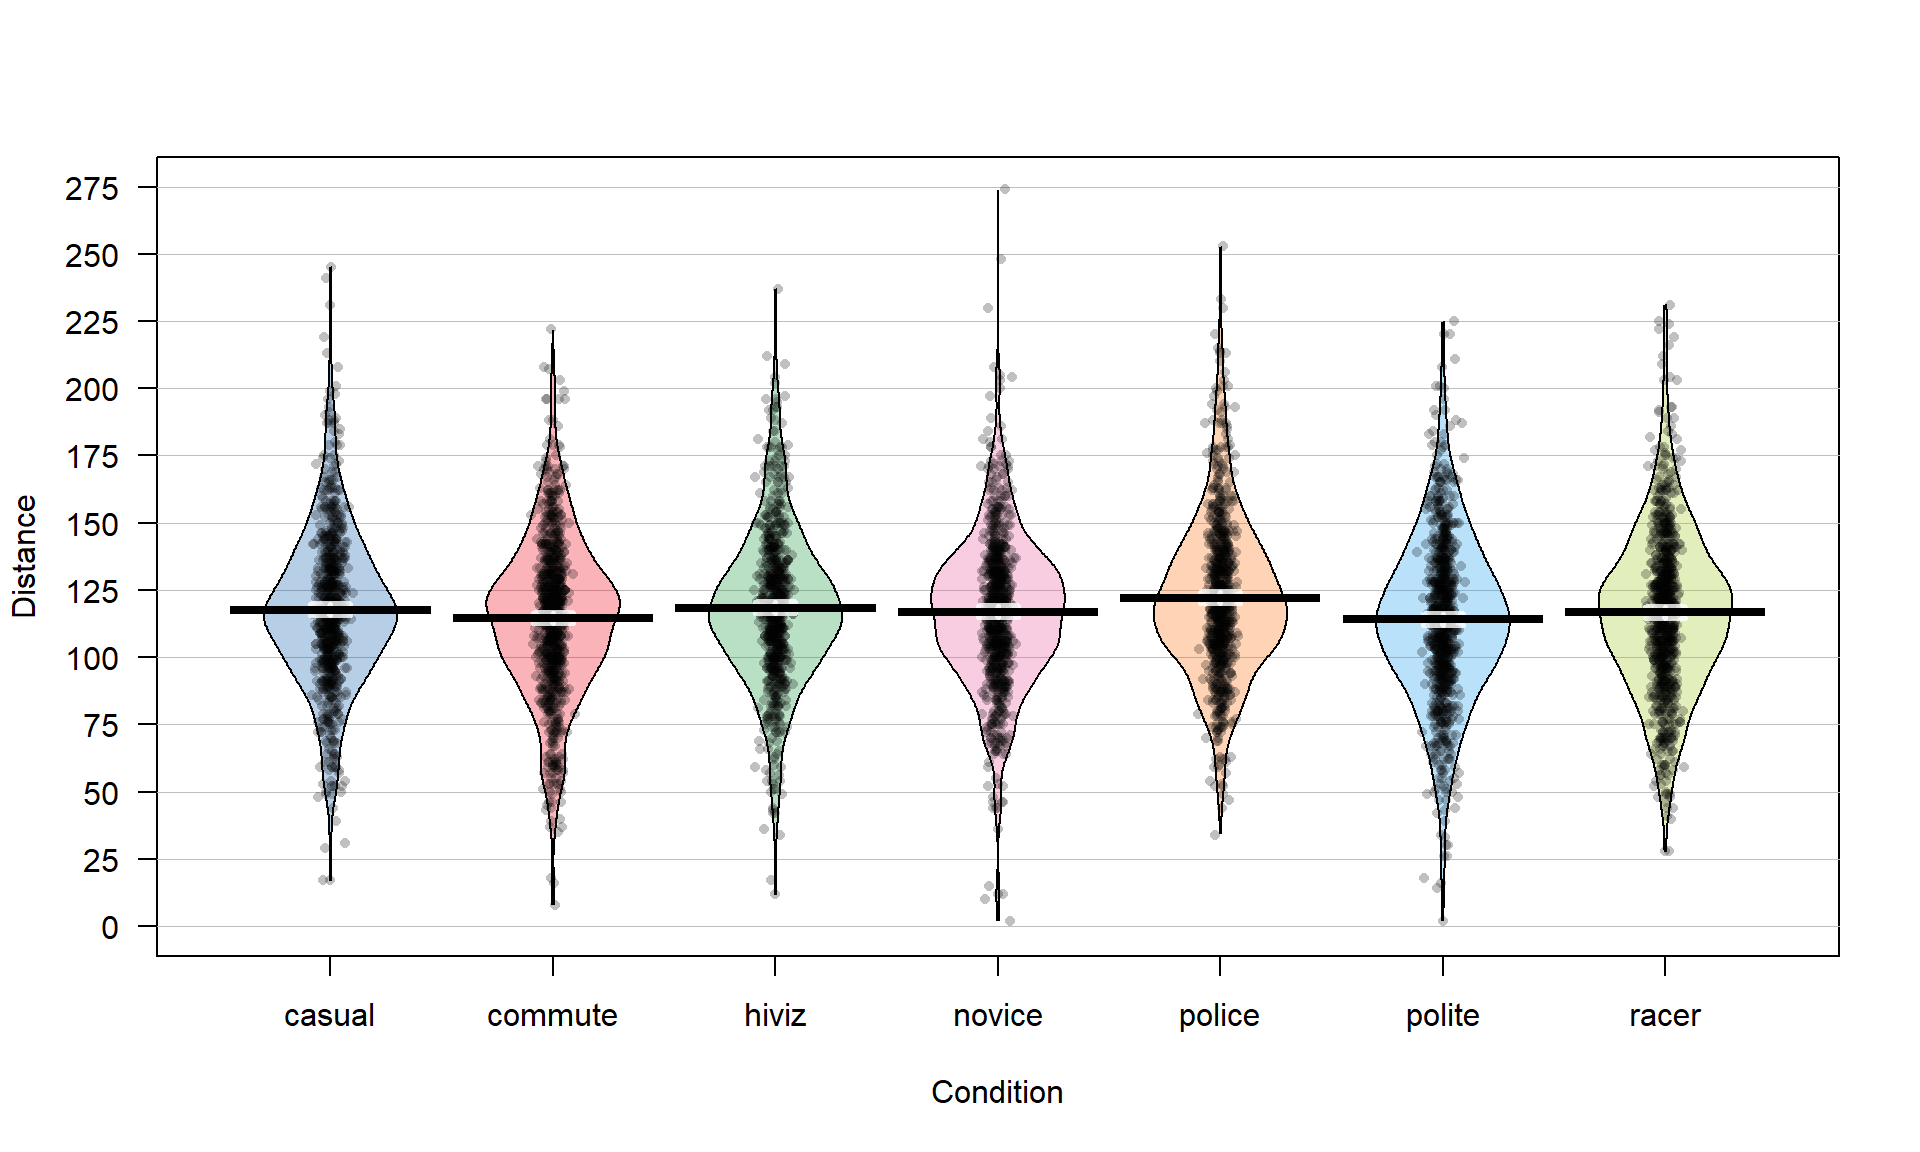 Pirate-plot of distances by outfit group. Bold horizontal lines correspond to sample mean of each group, boxes around lines (here they are very tight to the lines for the means) are the 95% confidence intervals.